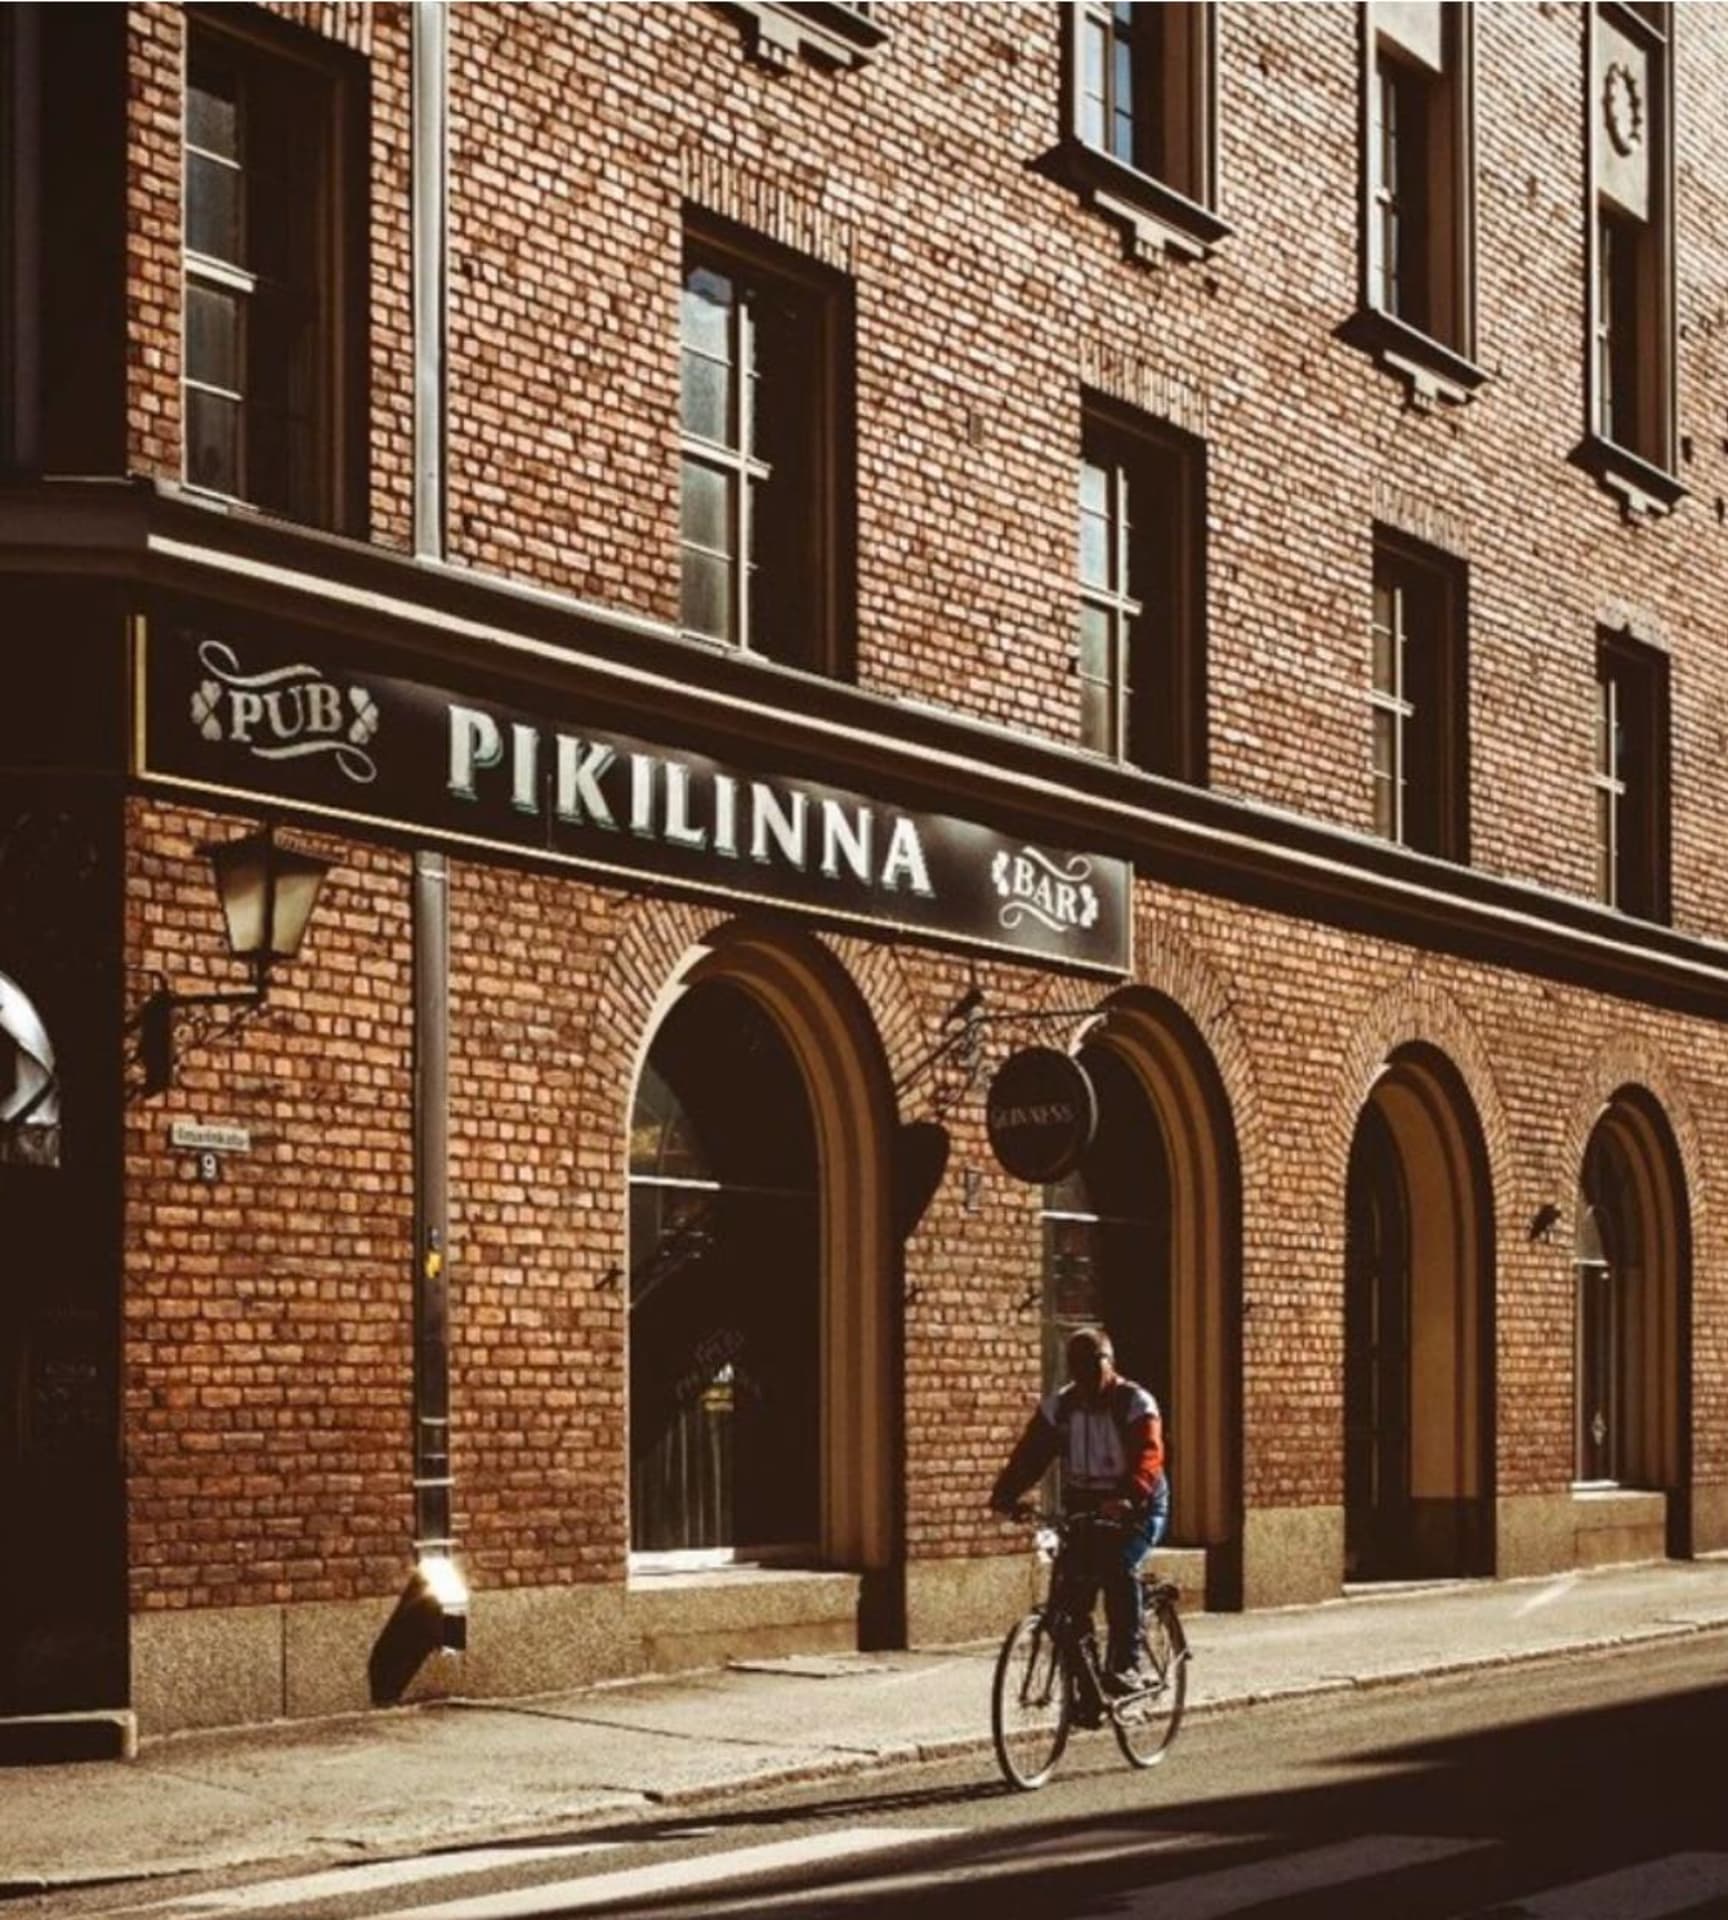 Pikilinna was built in 1924, the pub was founded in 1993